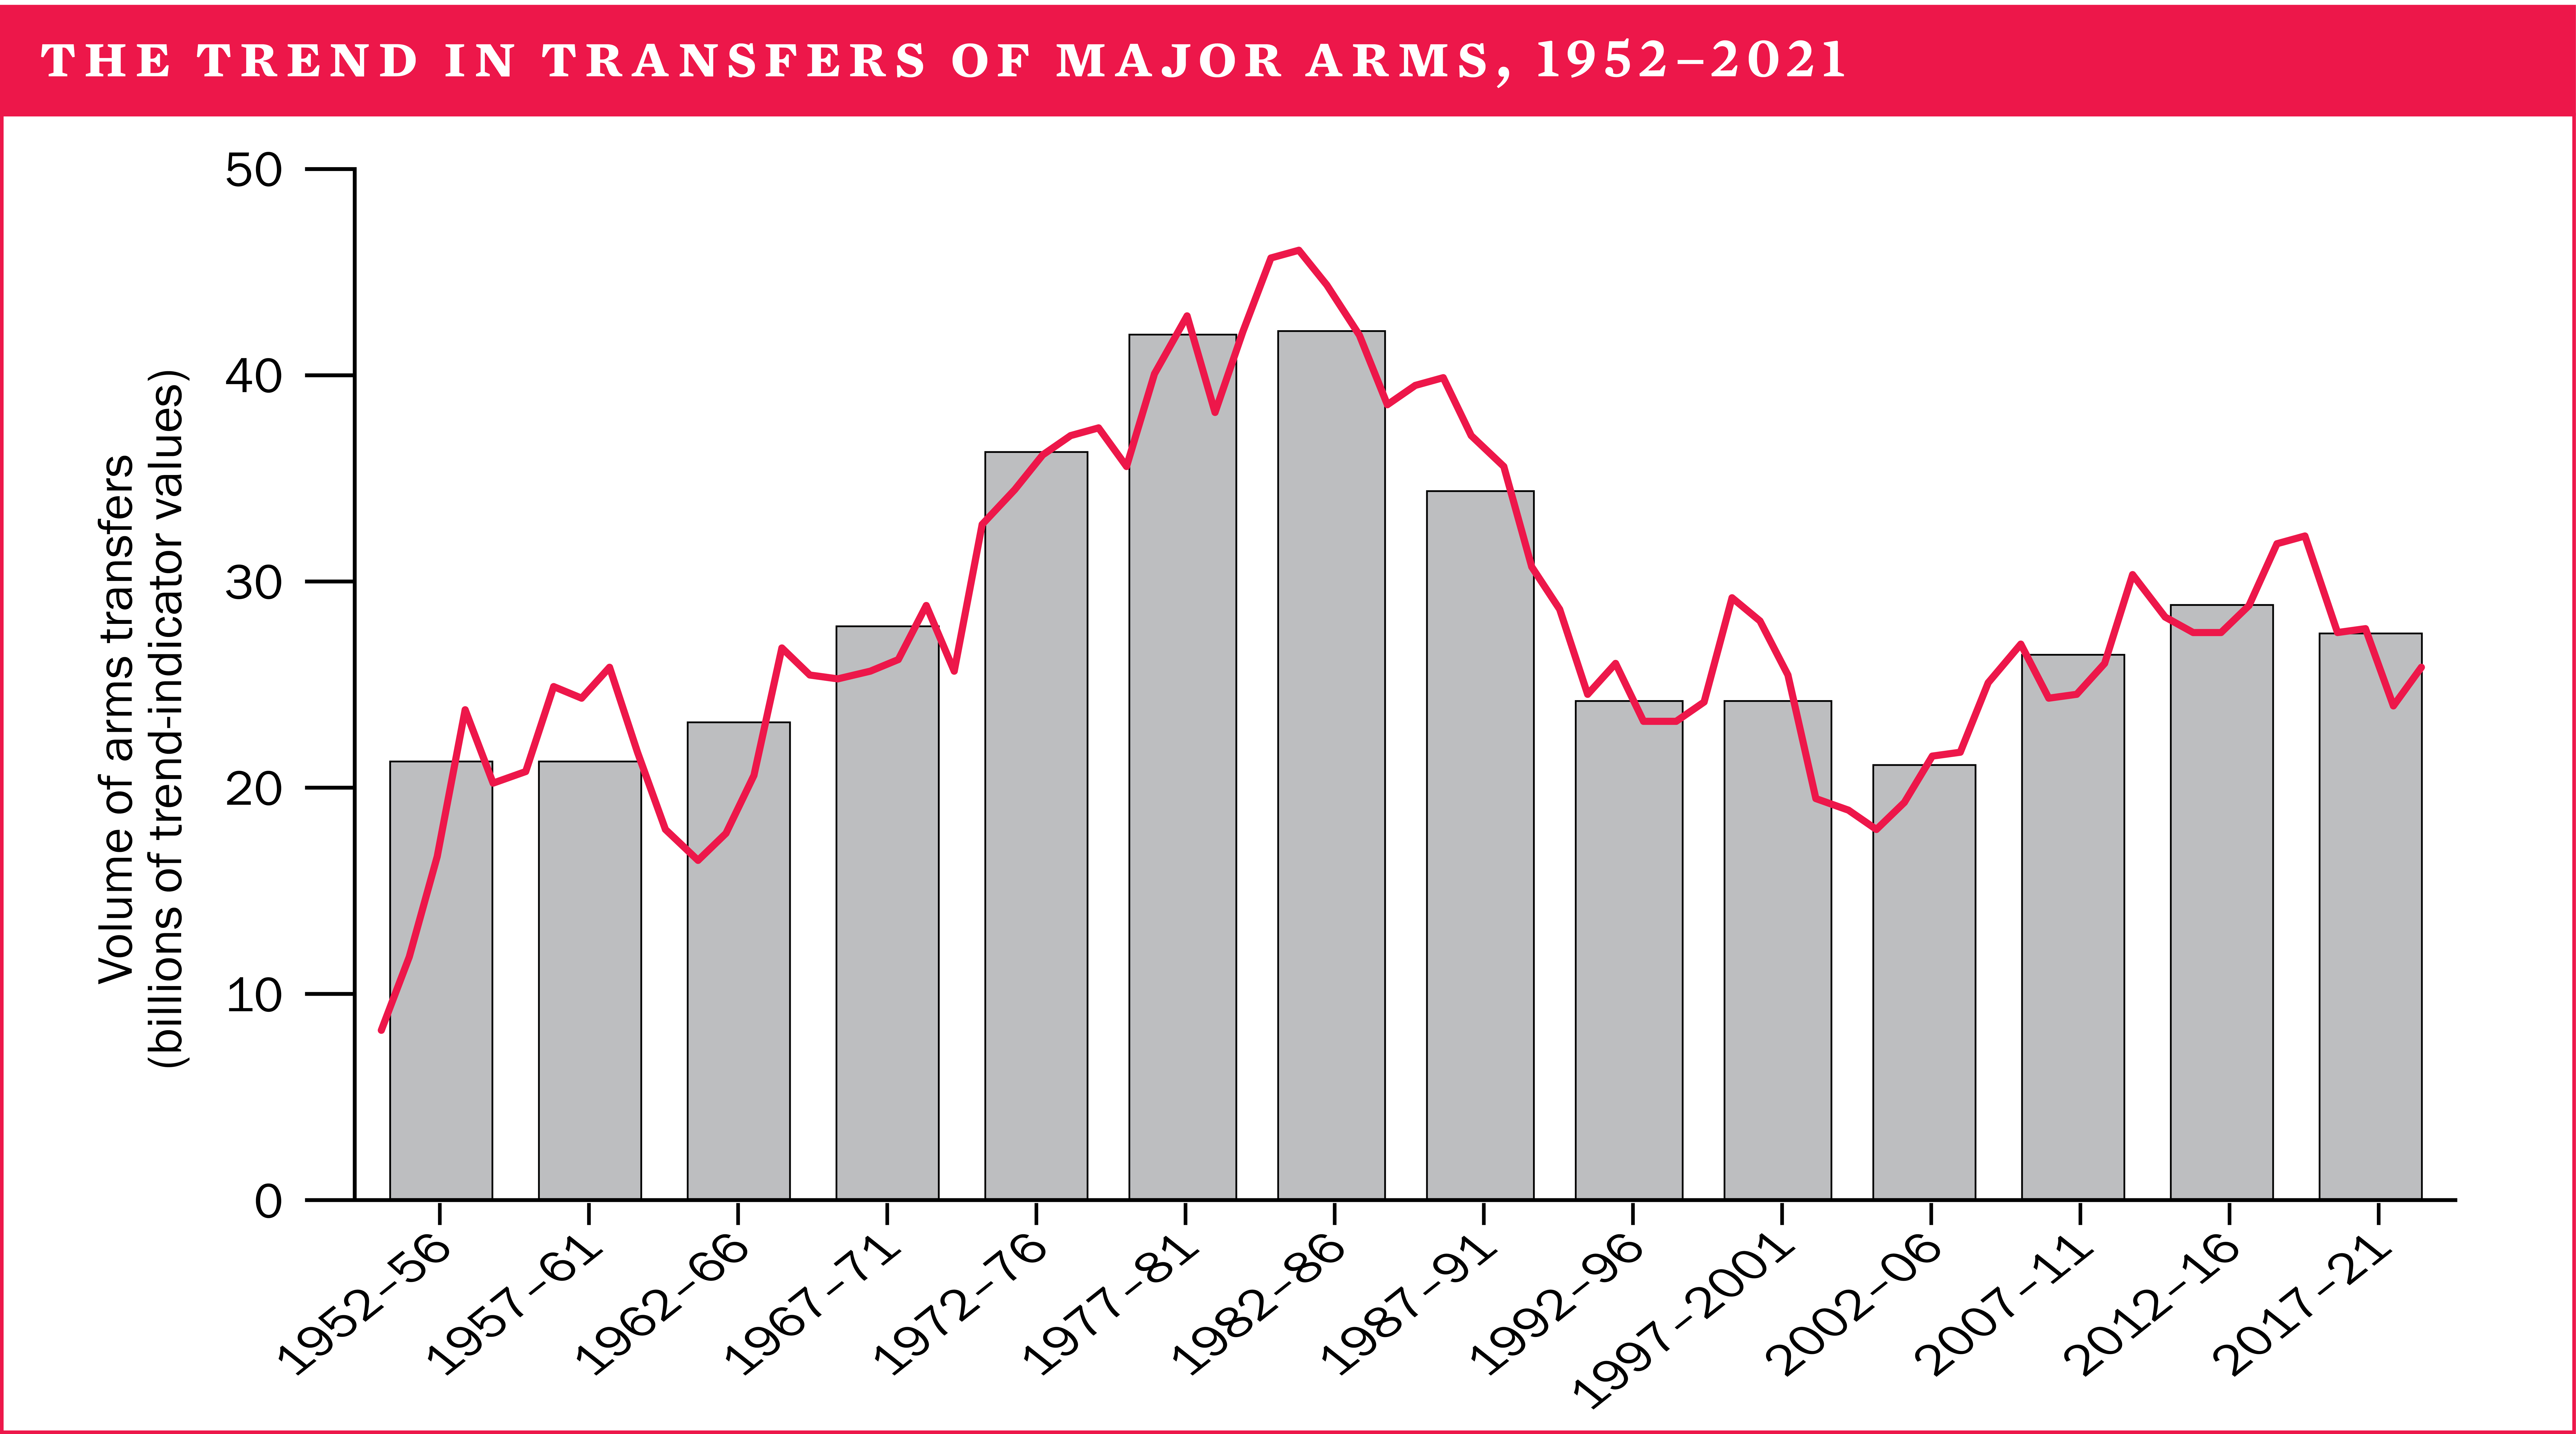 Trends in major arms transfers